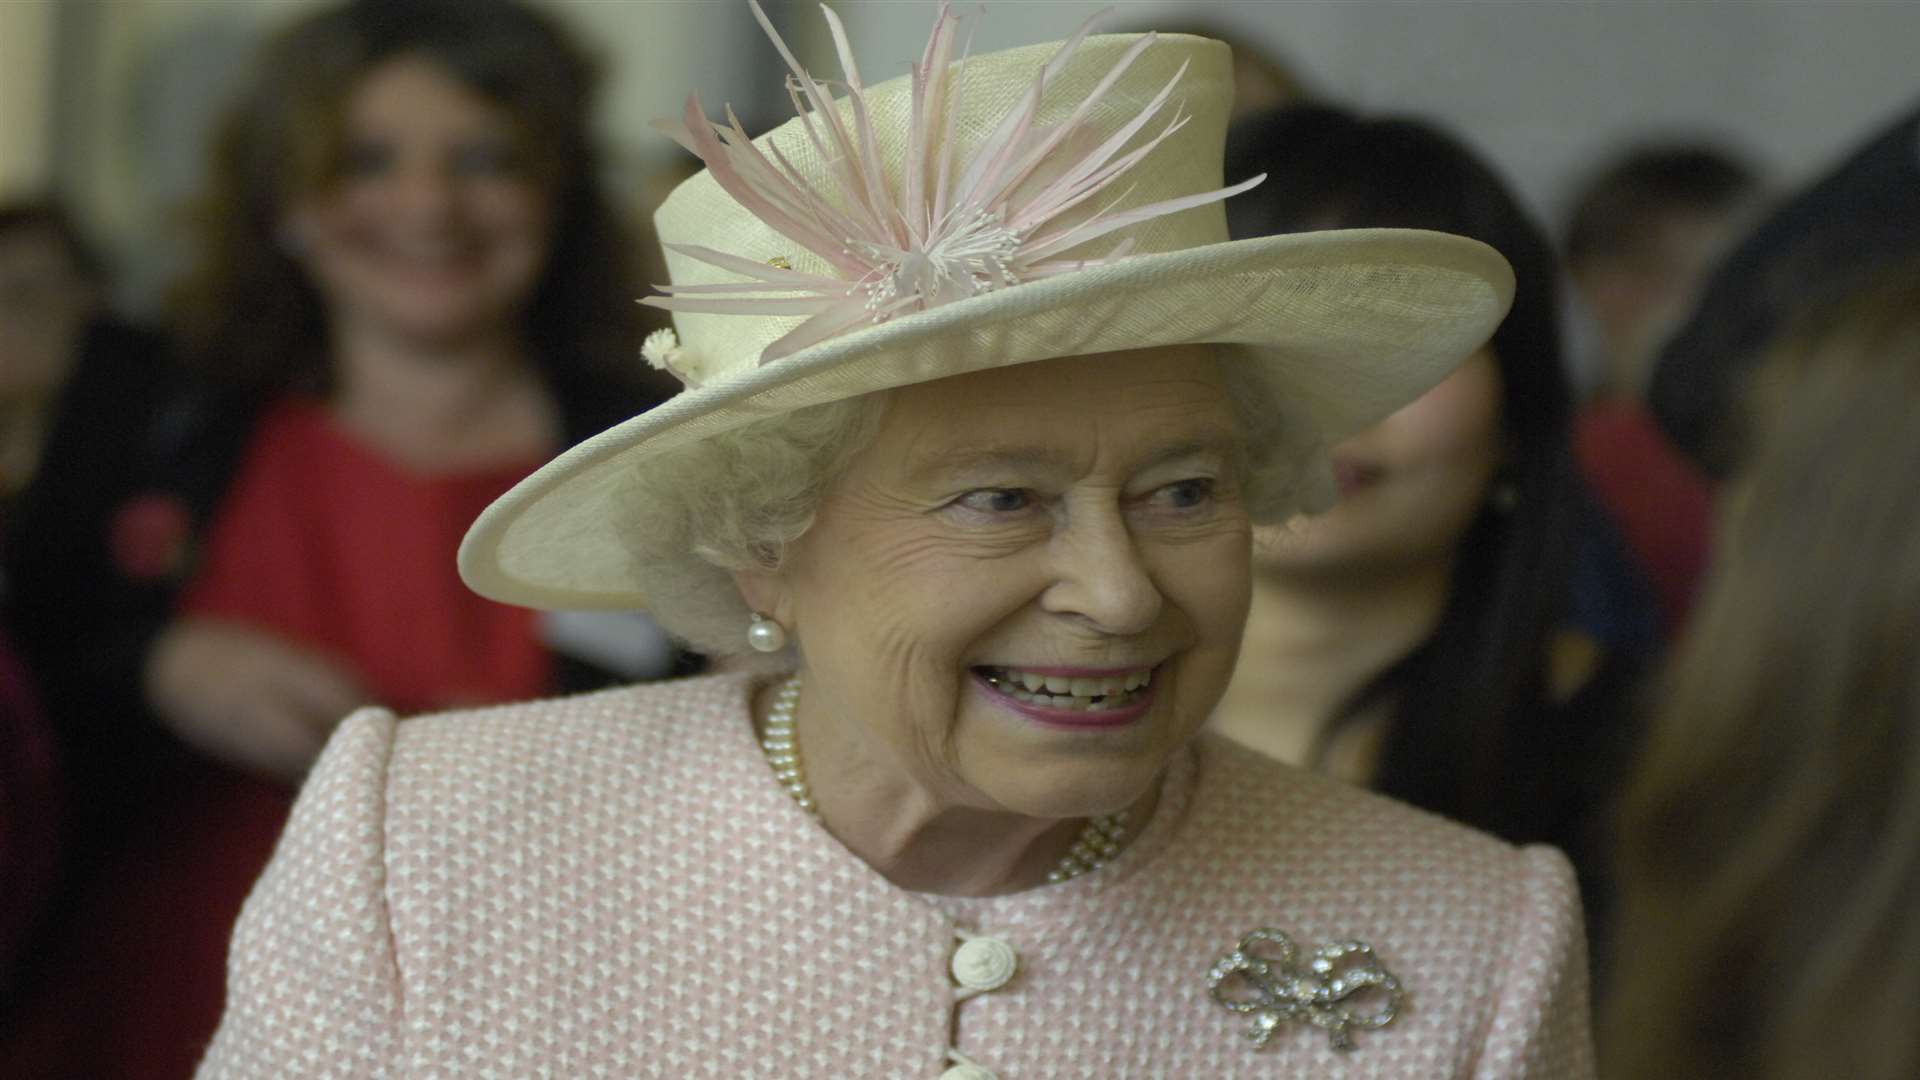 The Queen visited the gallery in 2011